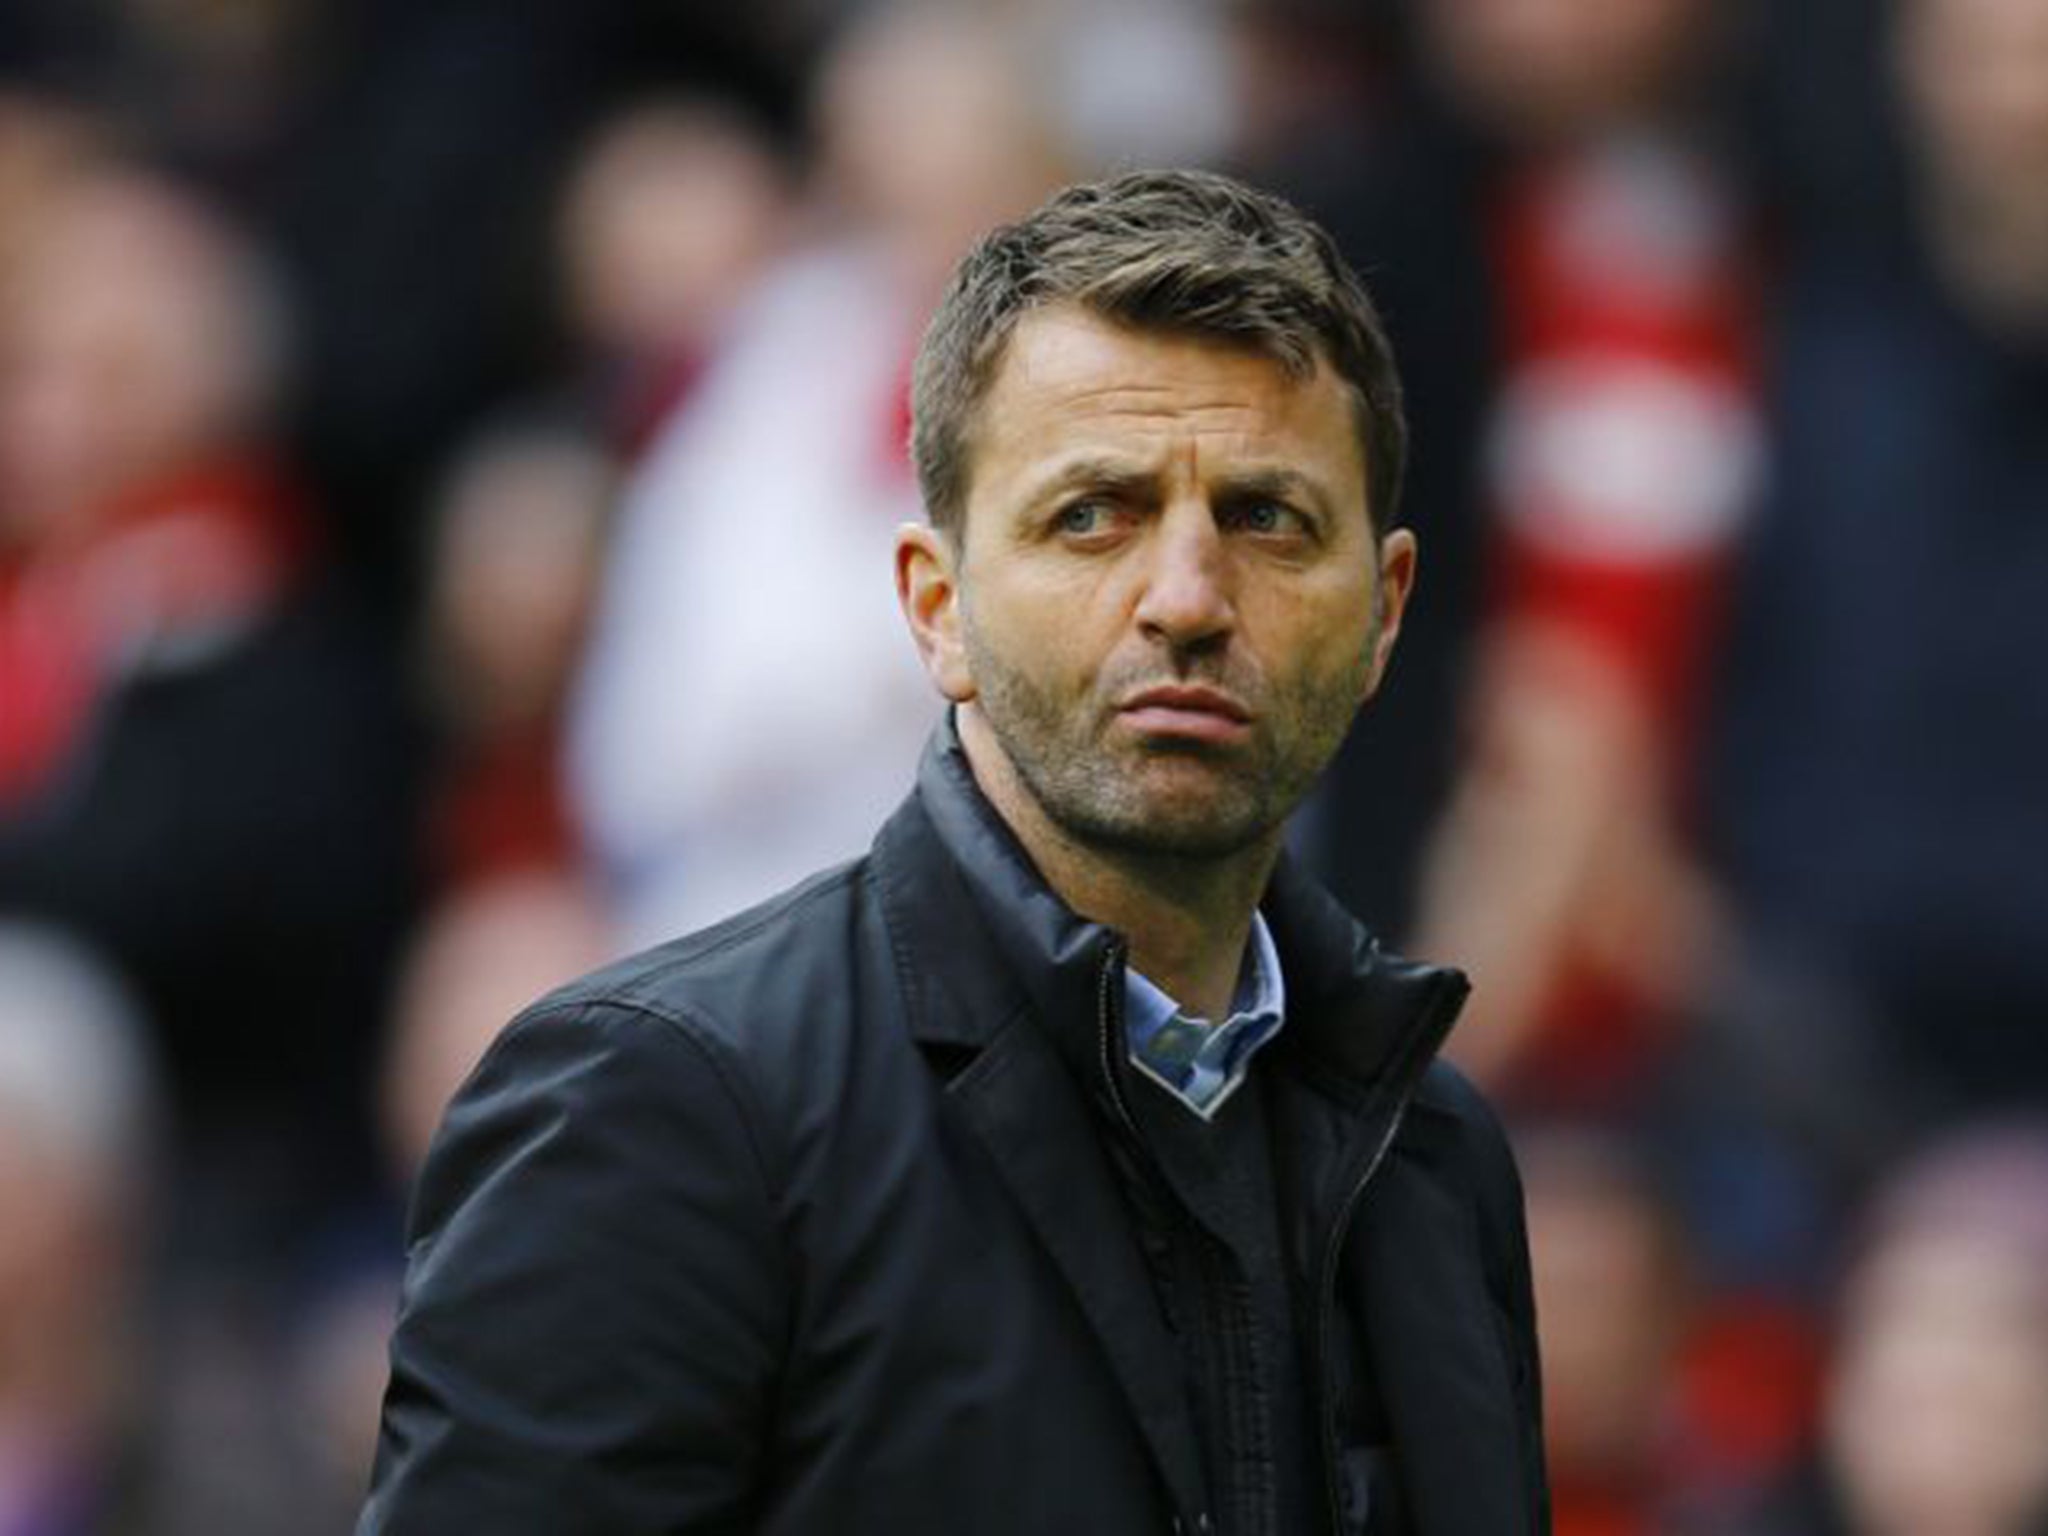 Tim Sherwood’s Aston Villa side would drop into the bottom three if they lose on Tuesday night